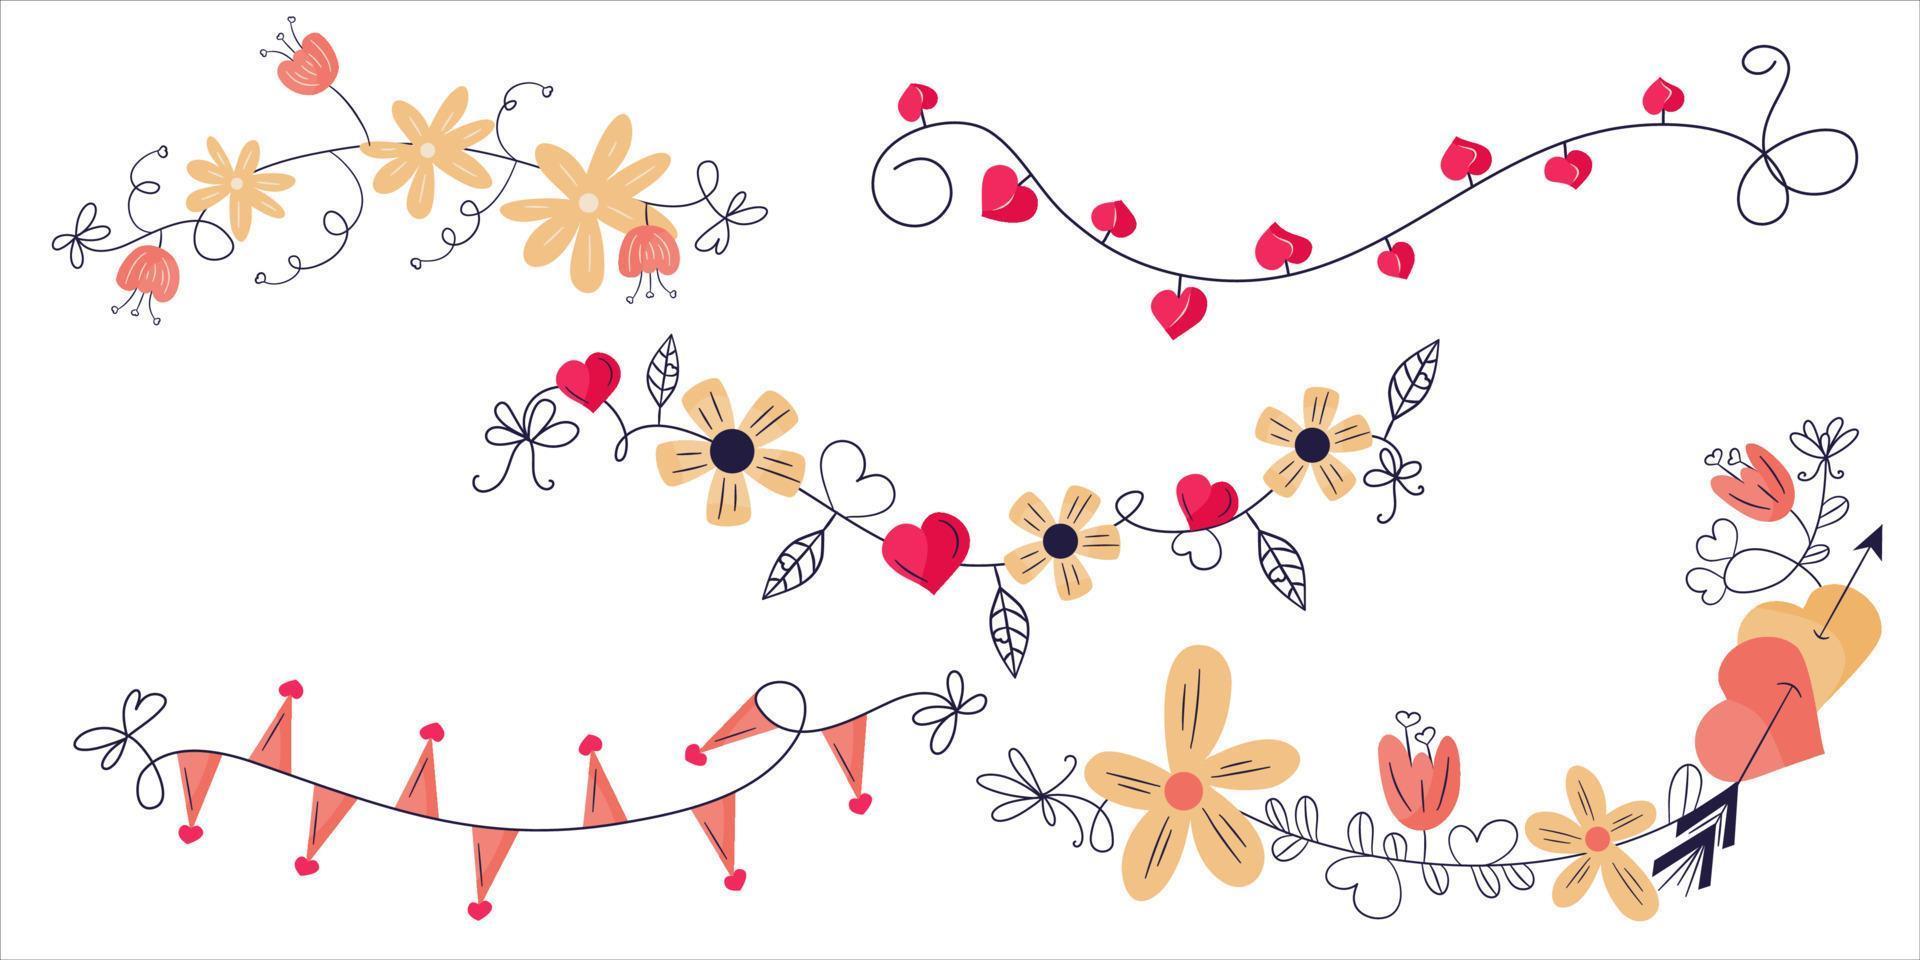 Set of garlands with hearts and flowers for Valentines Day isolated on white background.Hanging leaves and flowers for the holiday and decor. Vector illustration in flat hand style